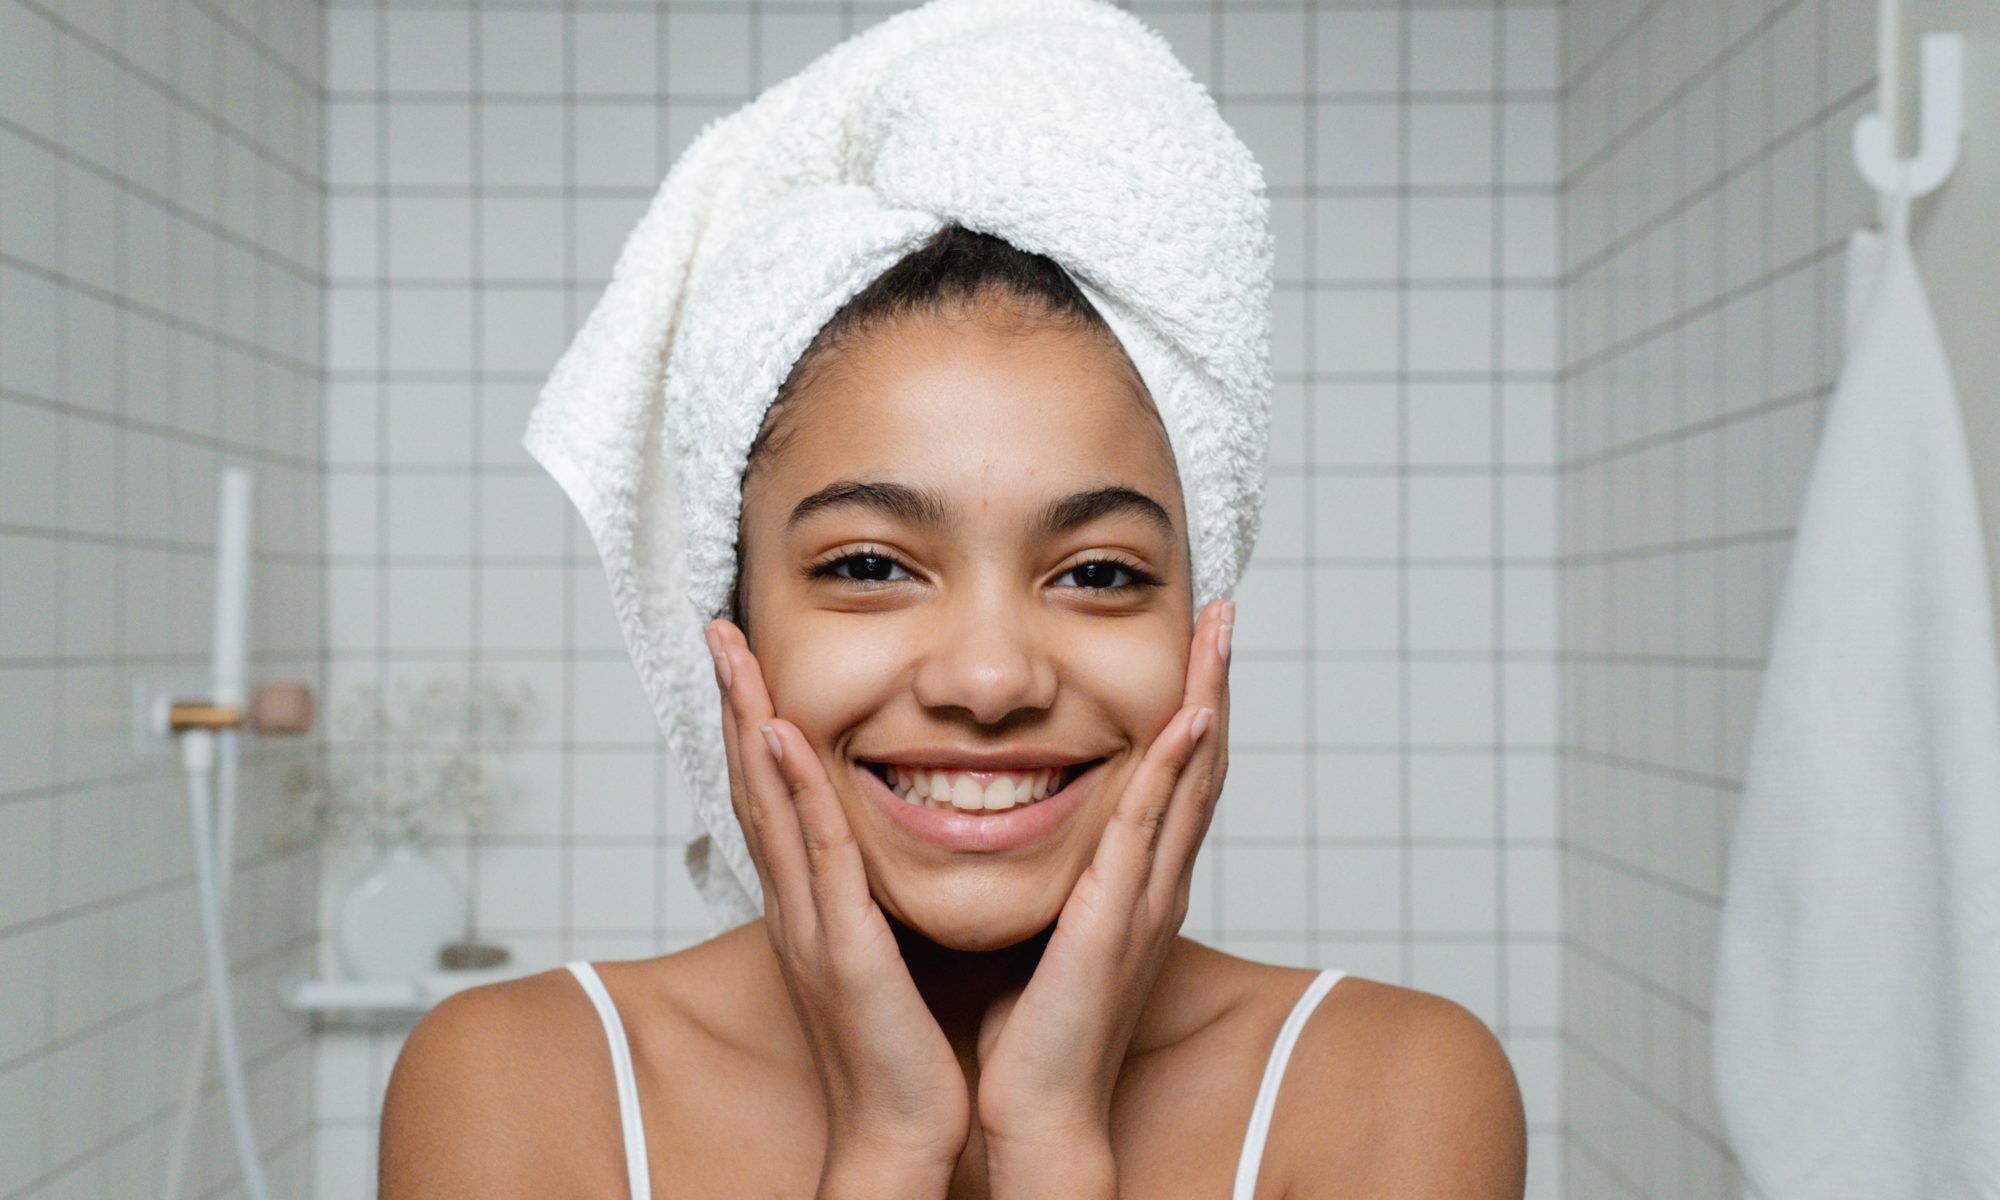 Women smiling and wearing a towel on her head